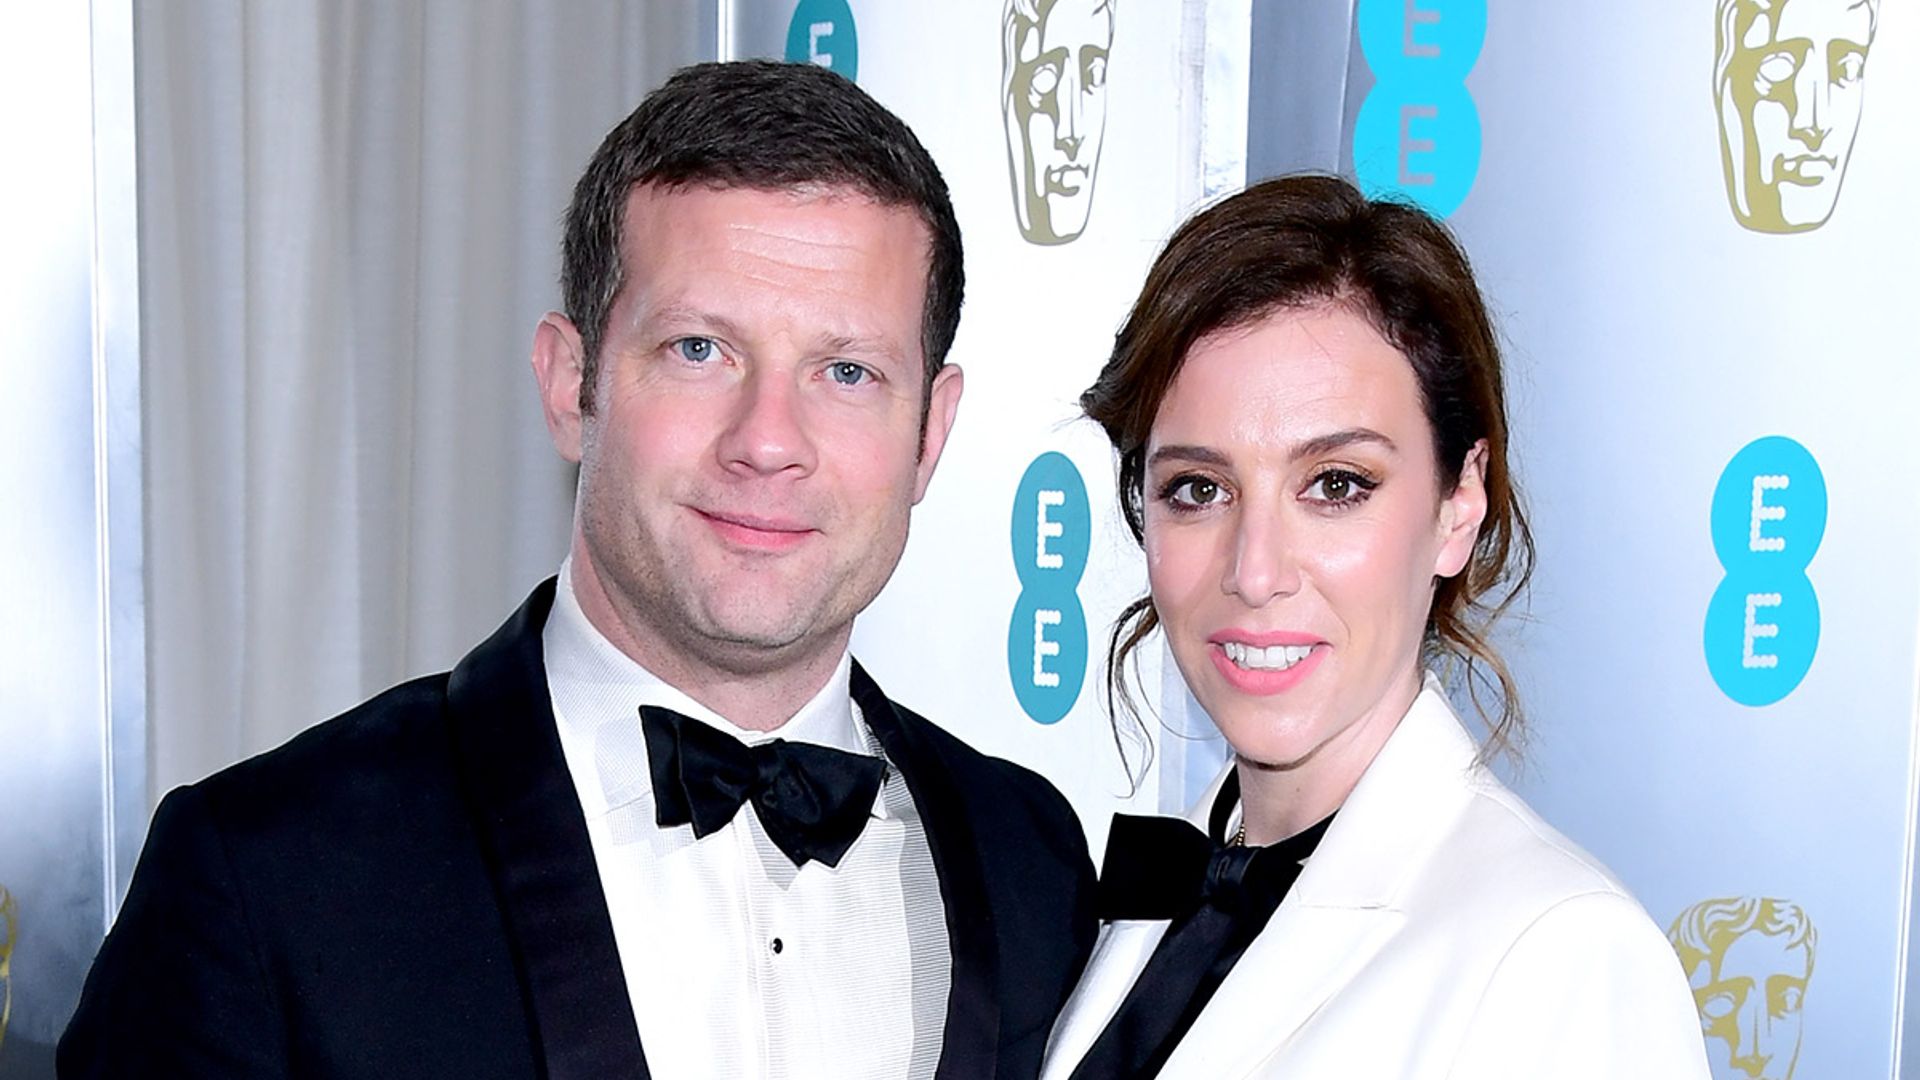 dermot-and-dee-at-press-event-